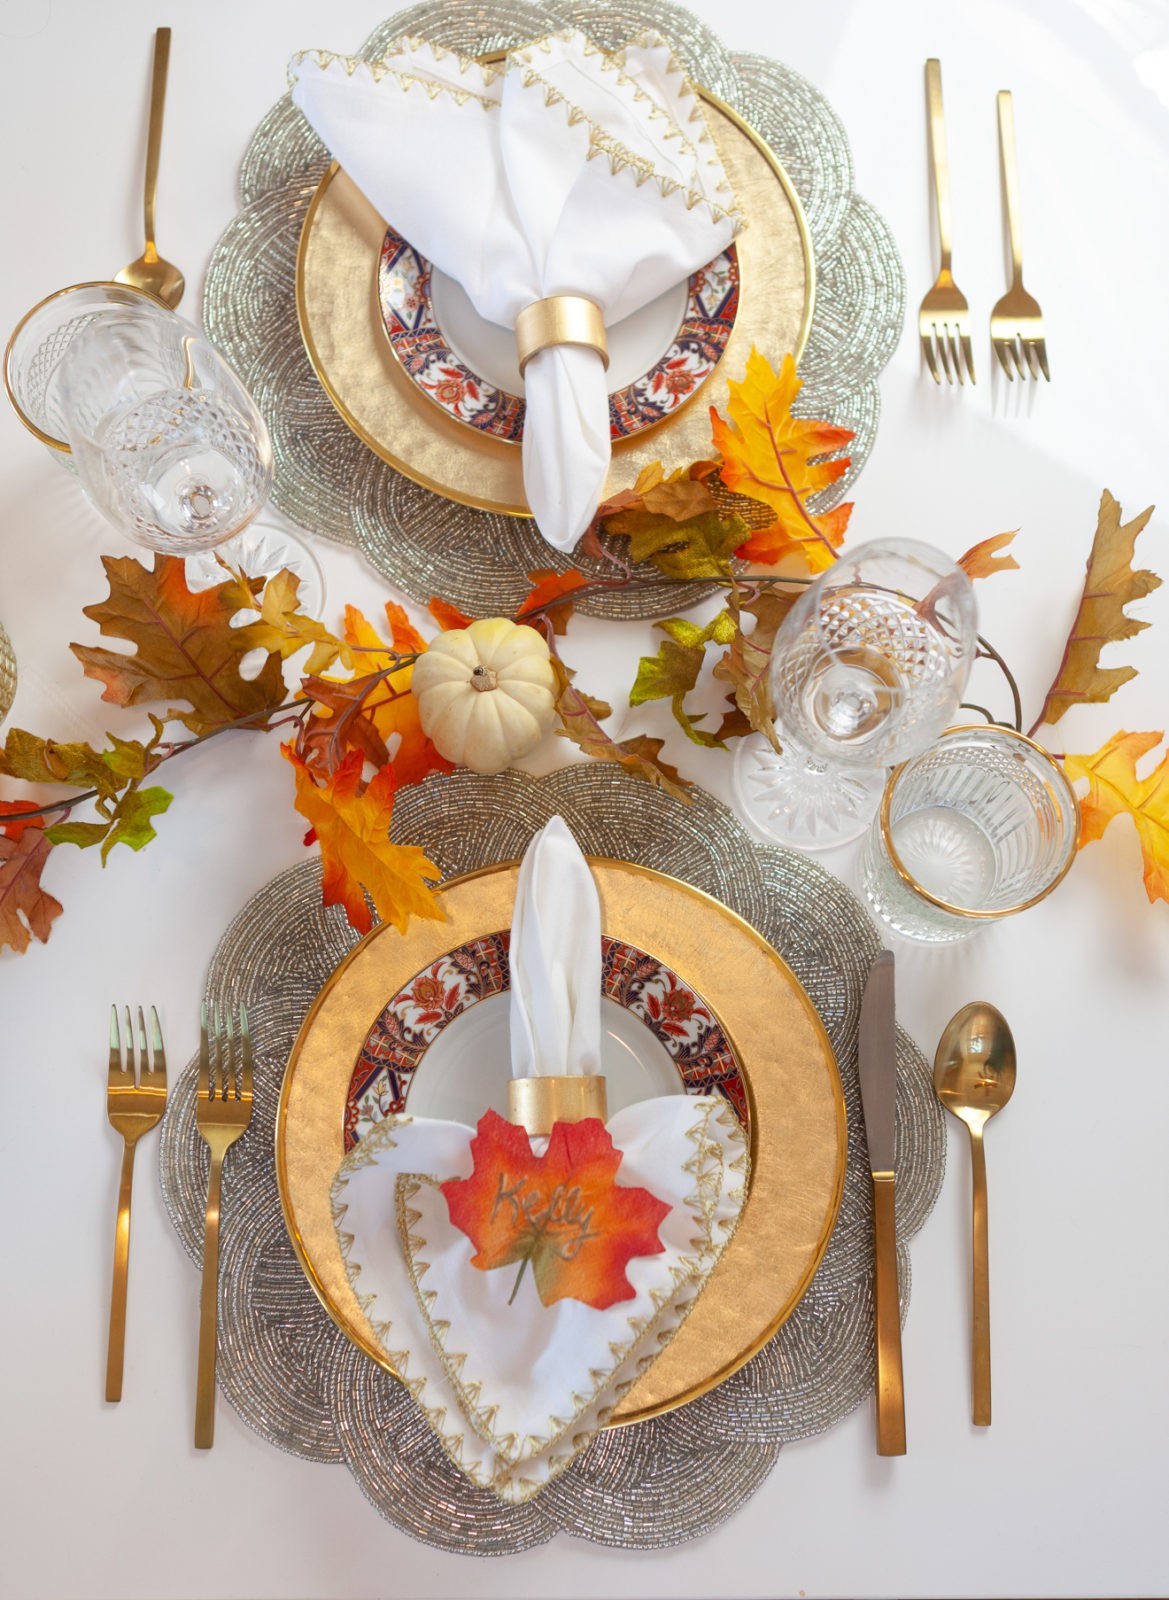 How to Create an Elegant Thanksgiving Table Setting by Home Decor